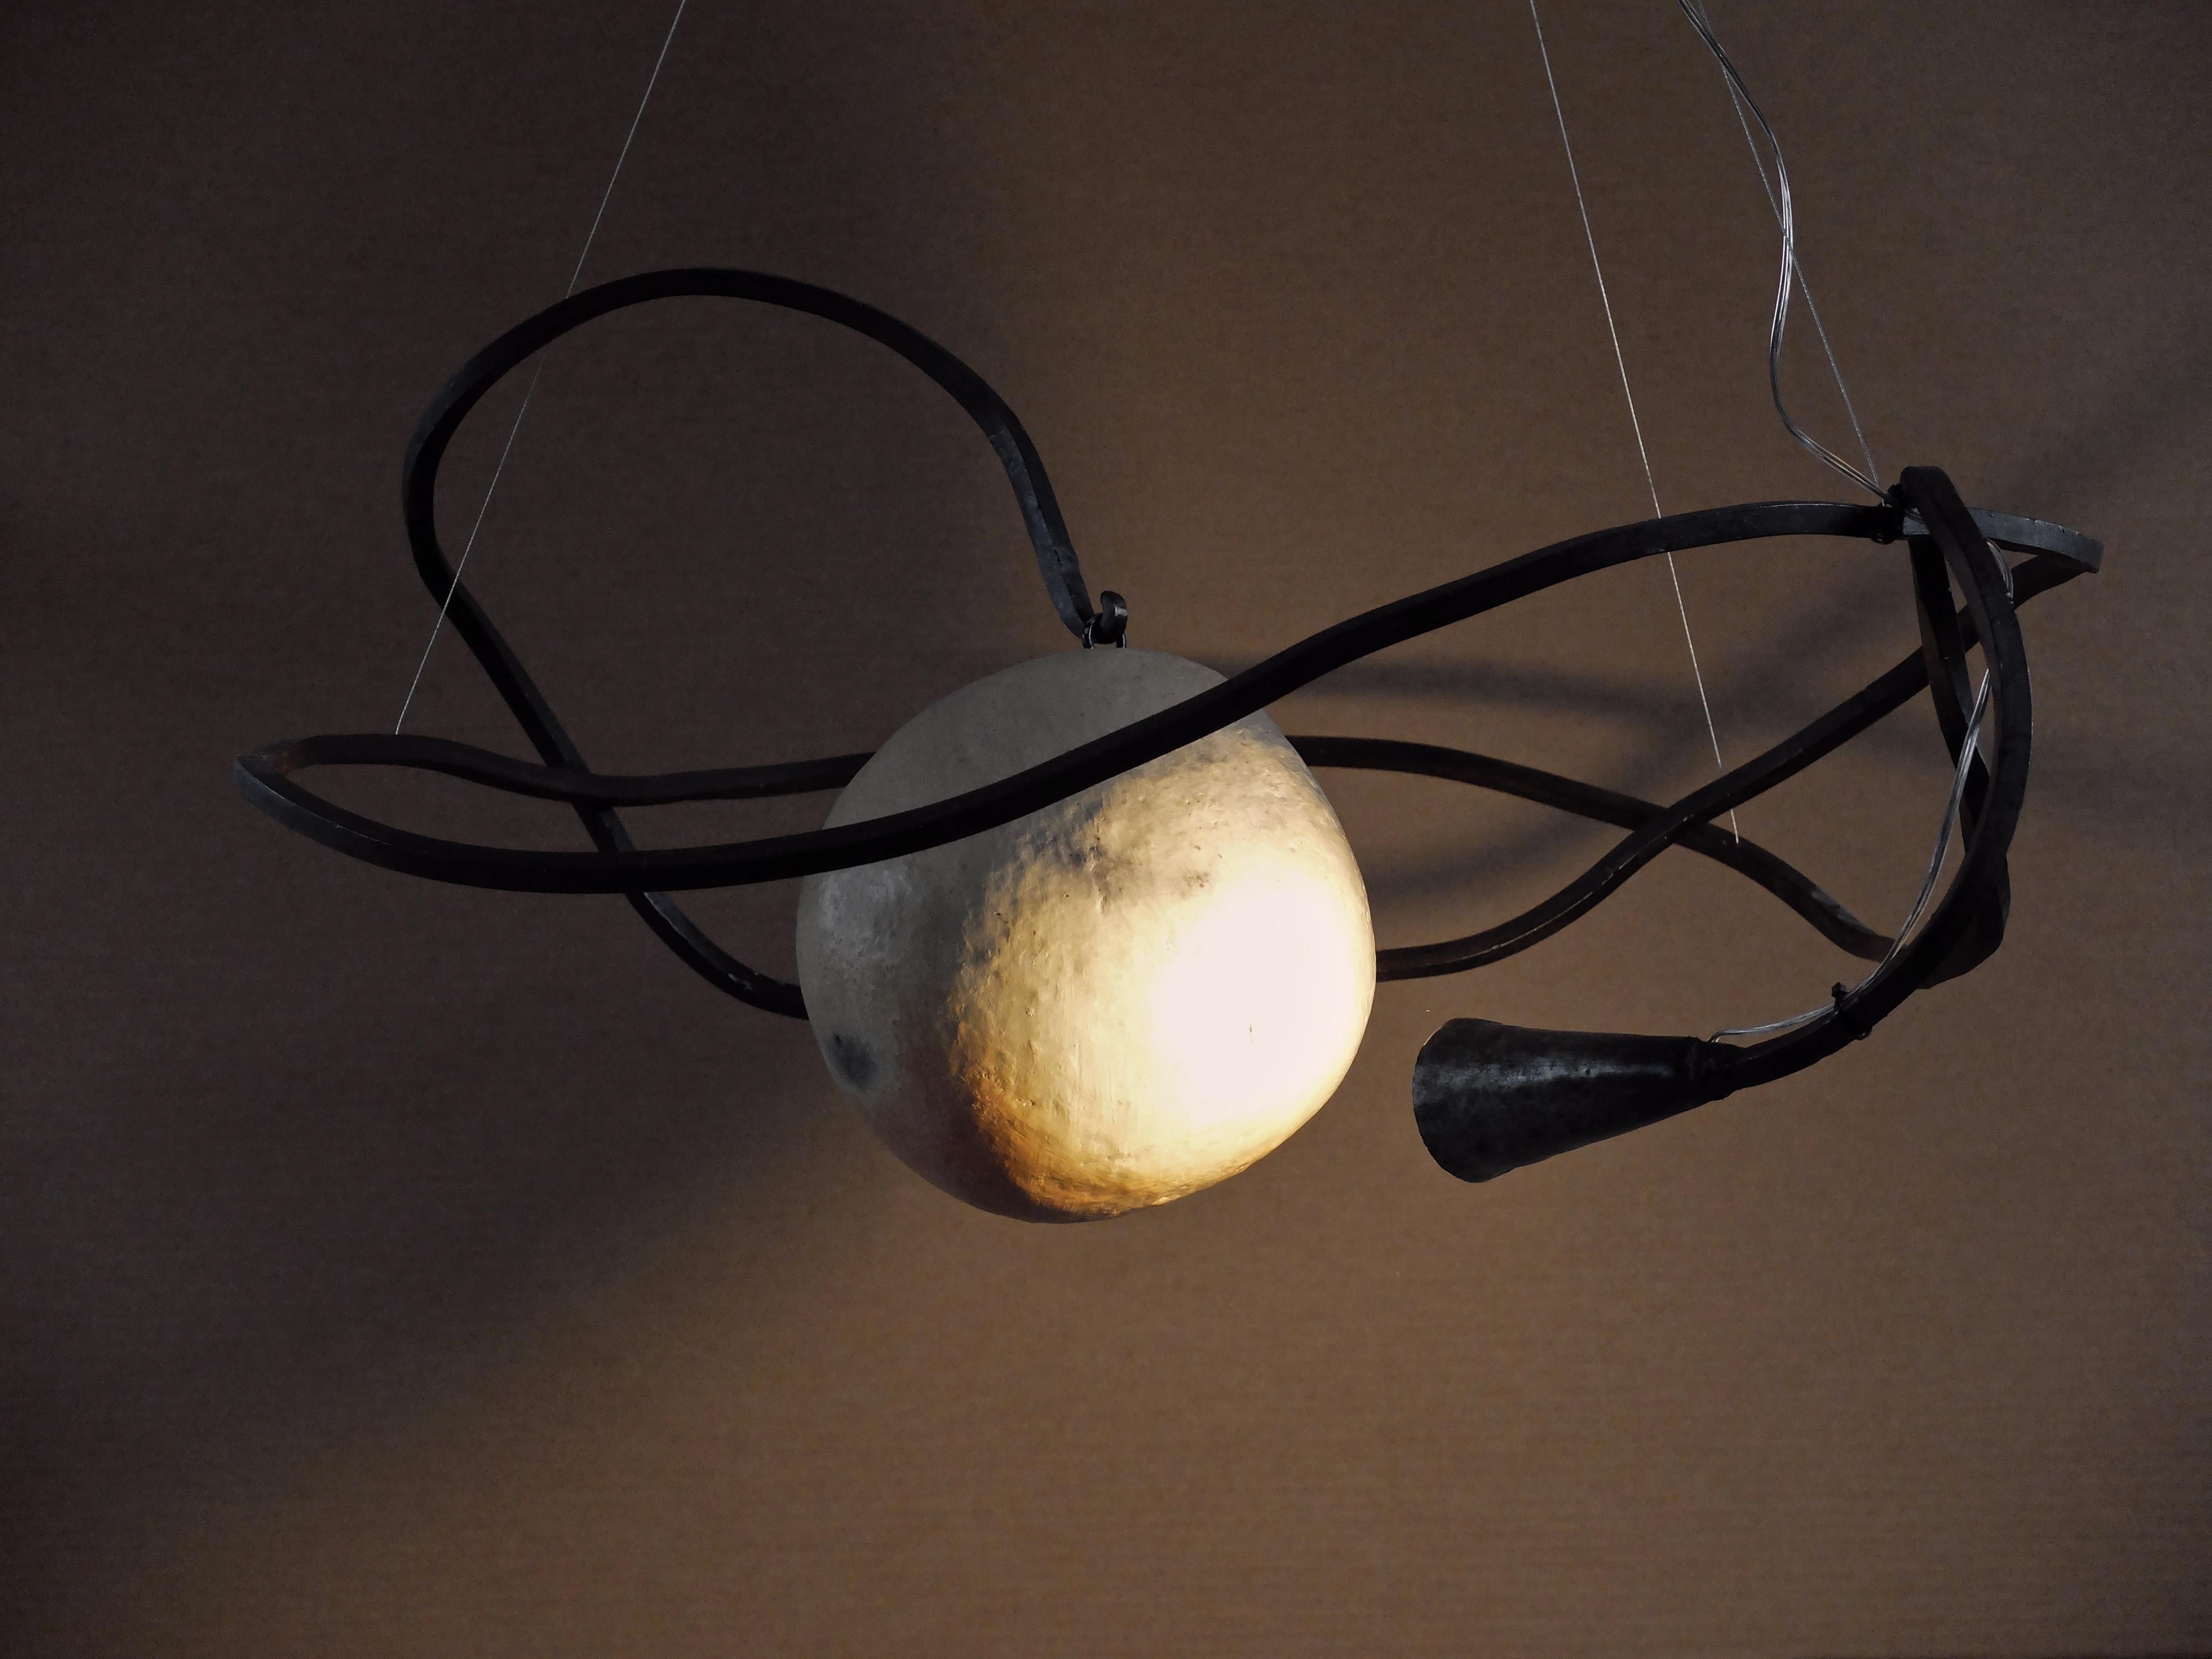 Nébuleuse Pendant Lamp by Altin
Designed and developed by Yasmine Sfar and Mehdi Kebaier.
Dimensions: D 90 x W 95 x H 35 cm
Materials: Metal, ceramic.

Earth and metal suspension light.

Orbit
A journey to a new dream world that we could call